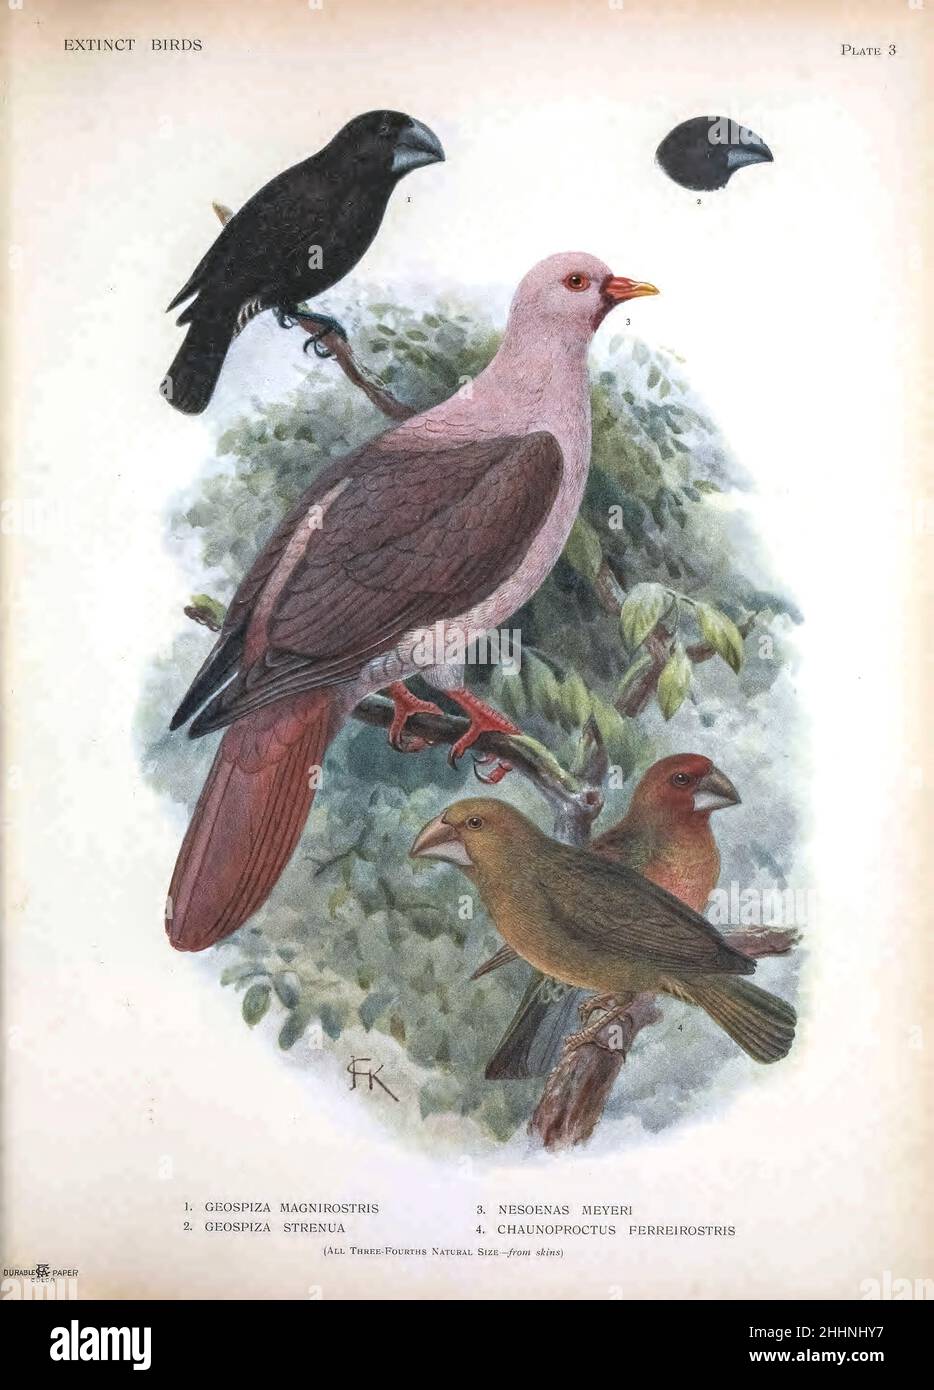 1. Geospiza magnirostris (Large Ground Finch) 2. Geospiza strenua (Ground Finch) 3. Nesoenas mayeri (pink pigeon) 4. Chaunoproctus ferreirostris  Bonin grosbeak or Bonin Islands grosbeak (Carpodacus ferreorostris) from ' Extinct birds ' : an attempt to unite in one volume a short account of those birds which have become extinct in historical times : that is, within the last six or seven hundred years : to which are added a few which still exist, but are on the verge of extinction. by Baron, Lionel Walter Rothschild, 1868-1937 Published 1907 as a limited edition book in London by Hutchinson & C Stock Photo